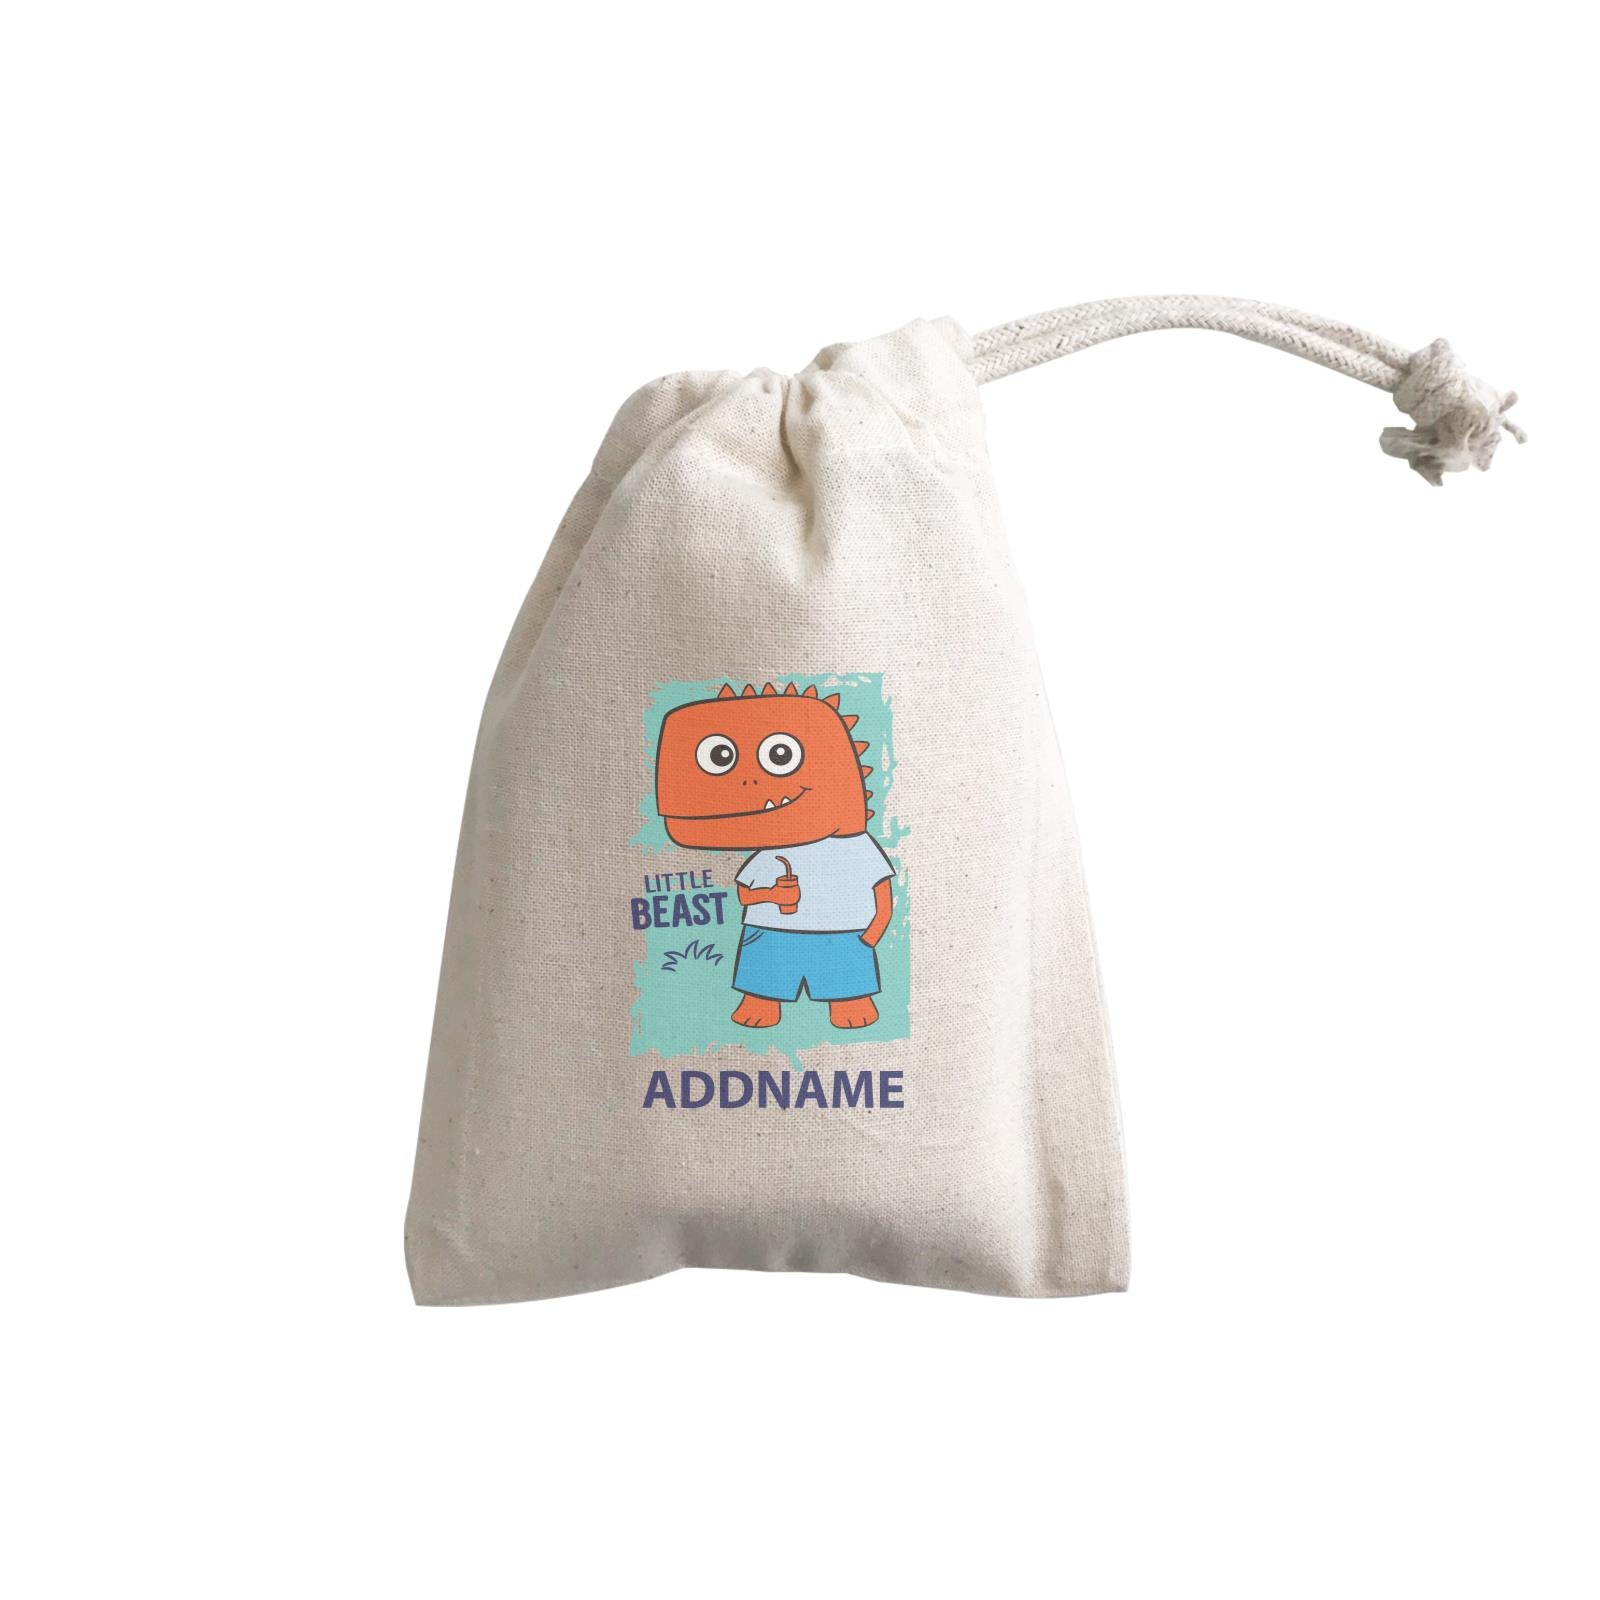 Cool Cute Dinosaur Little Beast Addname GP Gift Pouch